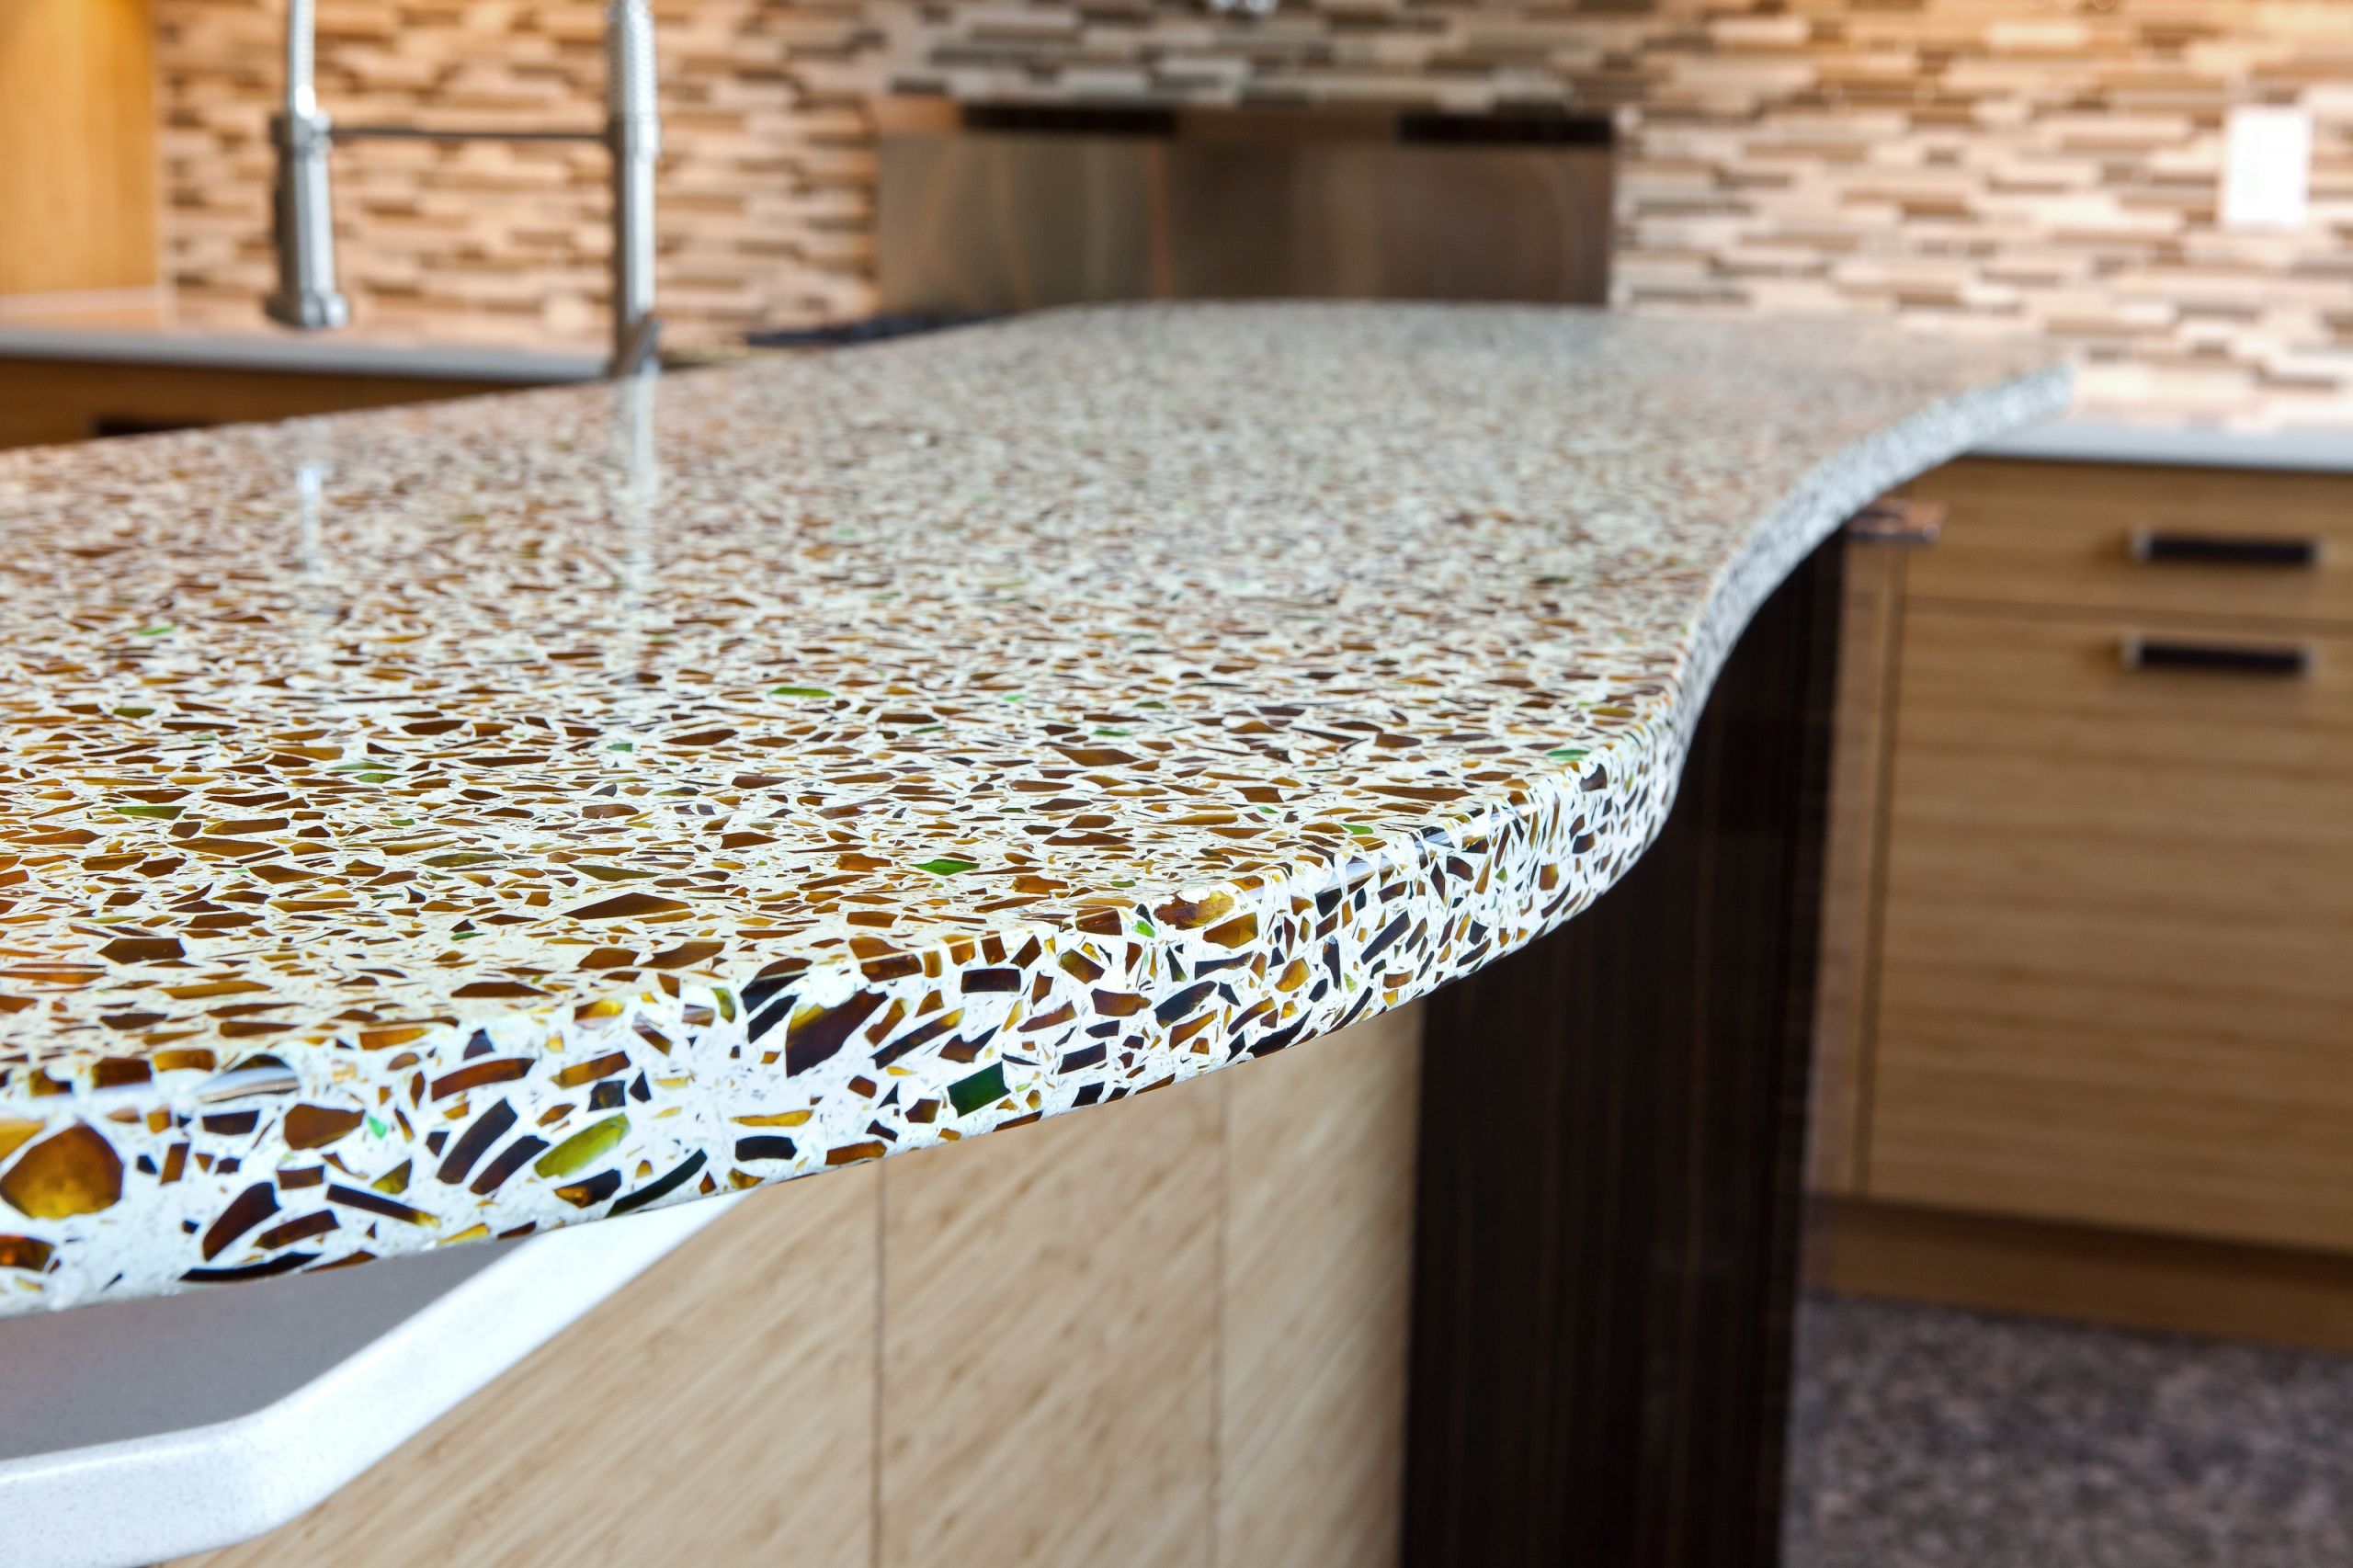 Recycled Glass Kitchen Countertops
 6 Ecofriendly Countertops for Sustainable Kitchen Design